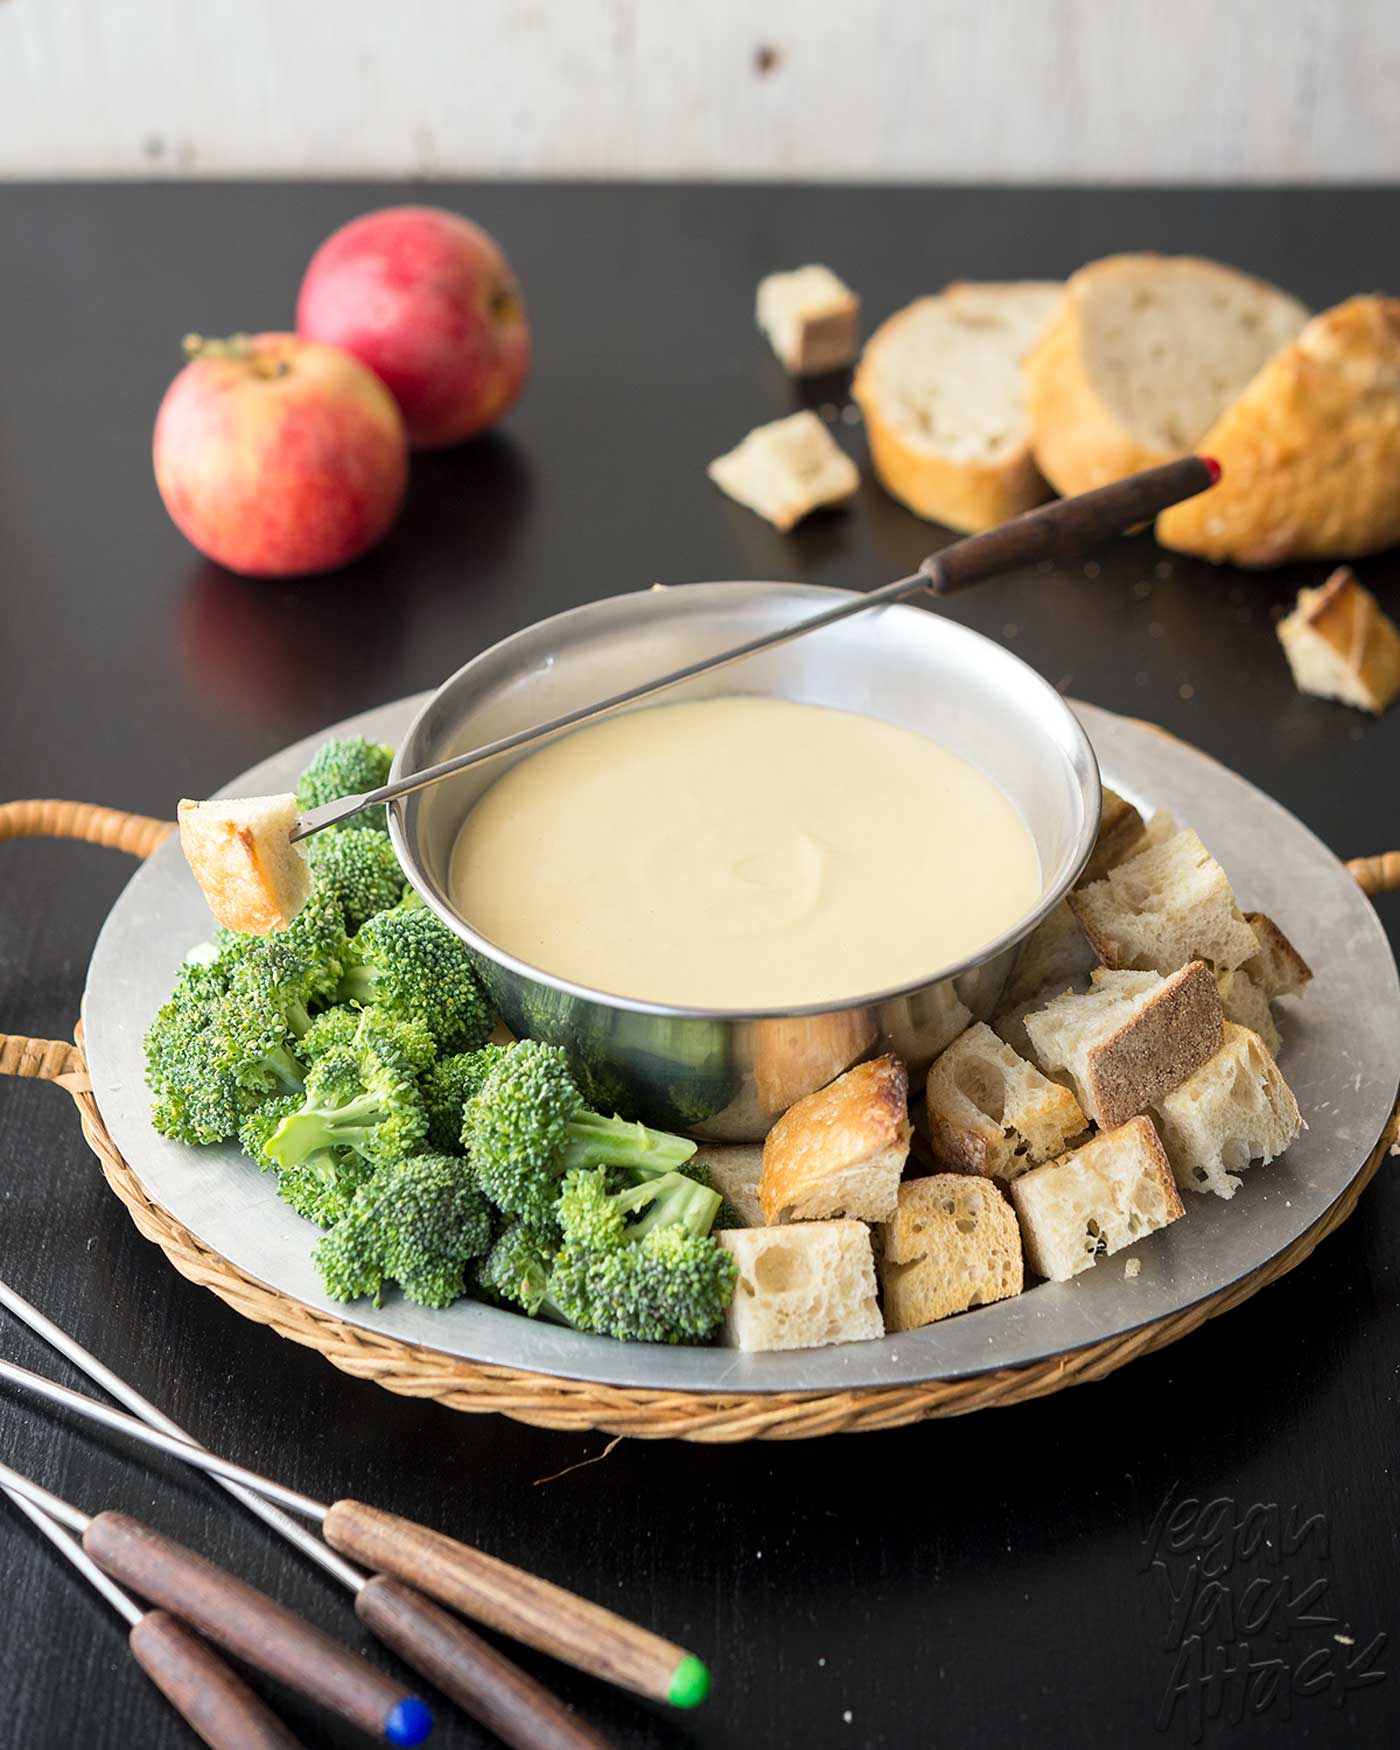 White bean beer fondue makes for a fun appetizer to be shared among friends, whether for a dinner party or a game night! This creamy, low-fat, fondue is a delicious crowd-pleaser, especially with its beer-tinged aroma. #veganbowlattack #vegan #soyfree #dairyfree #appetizer